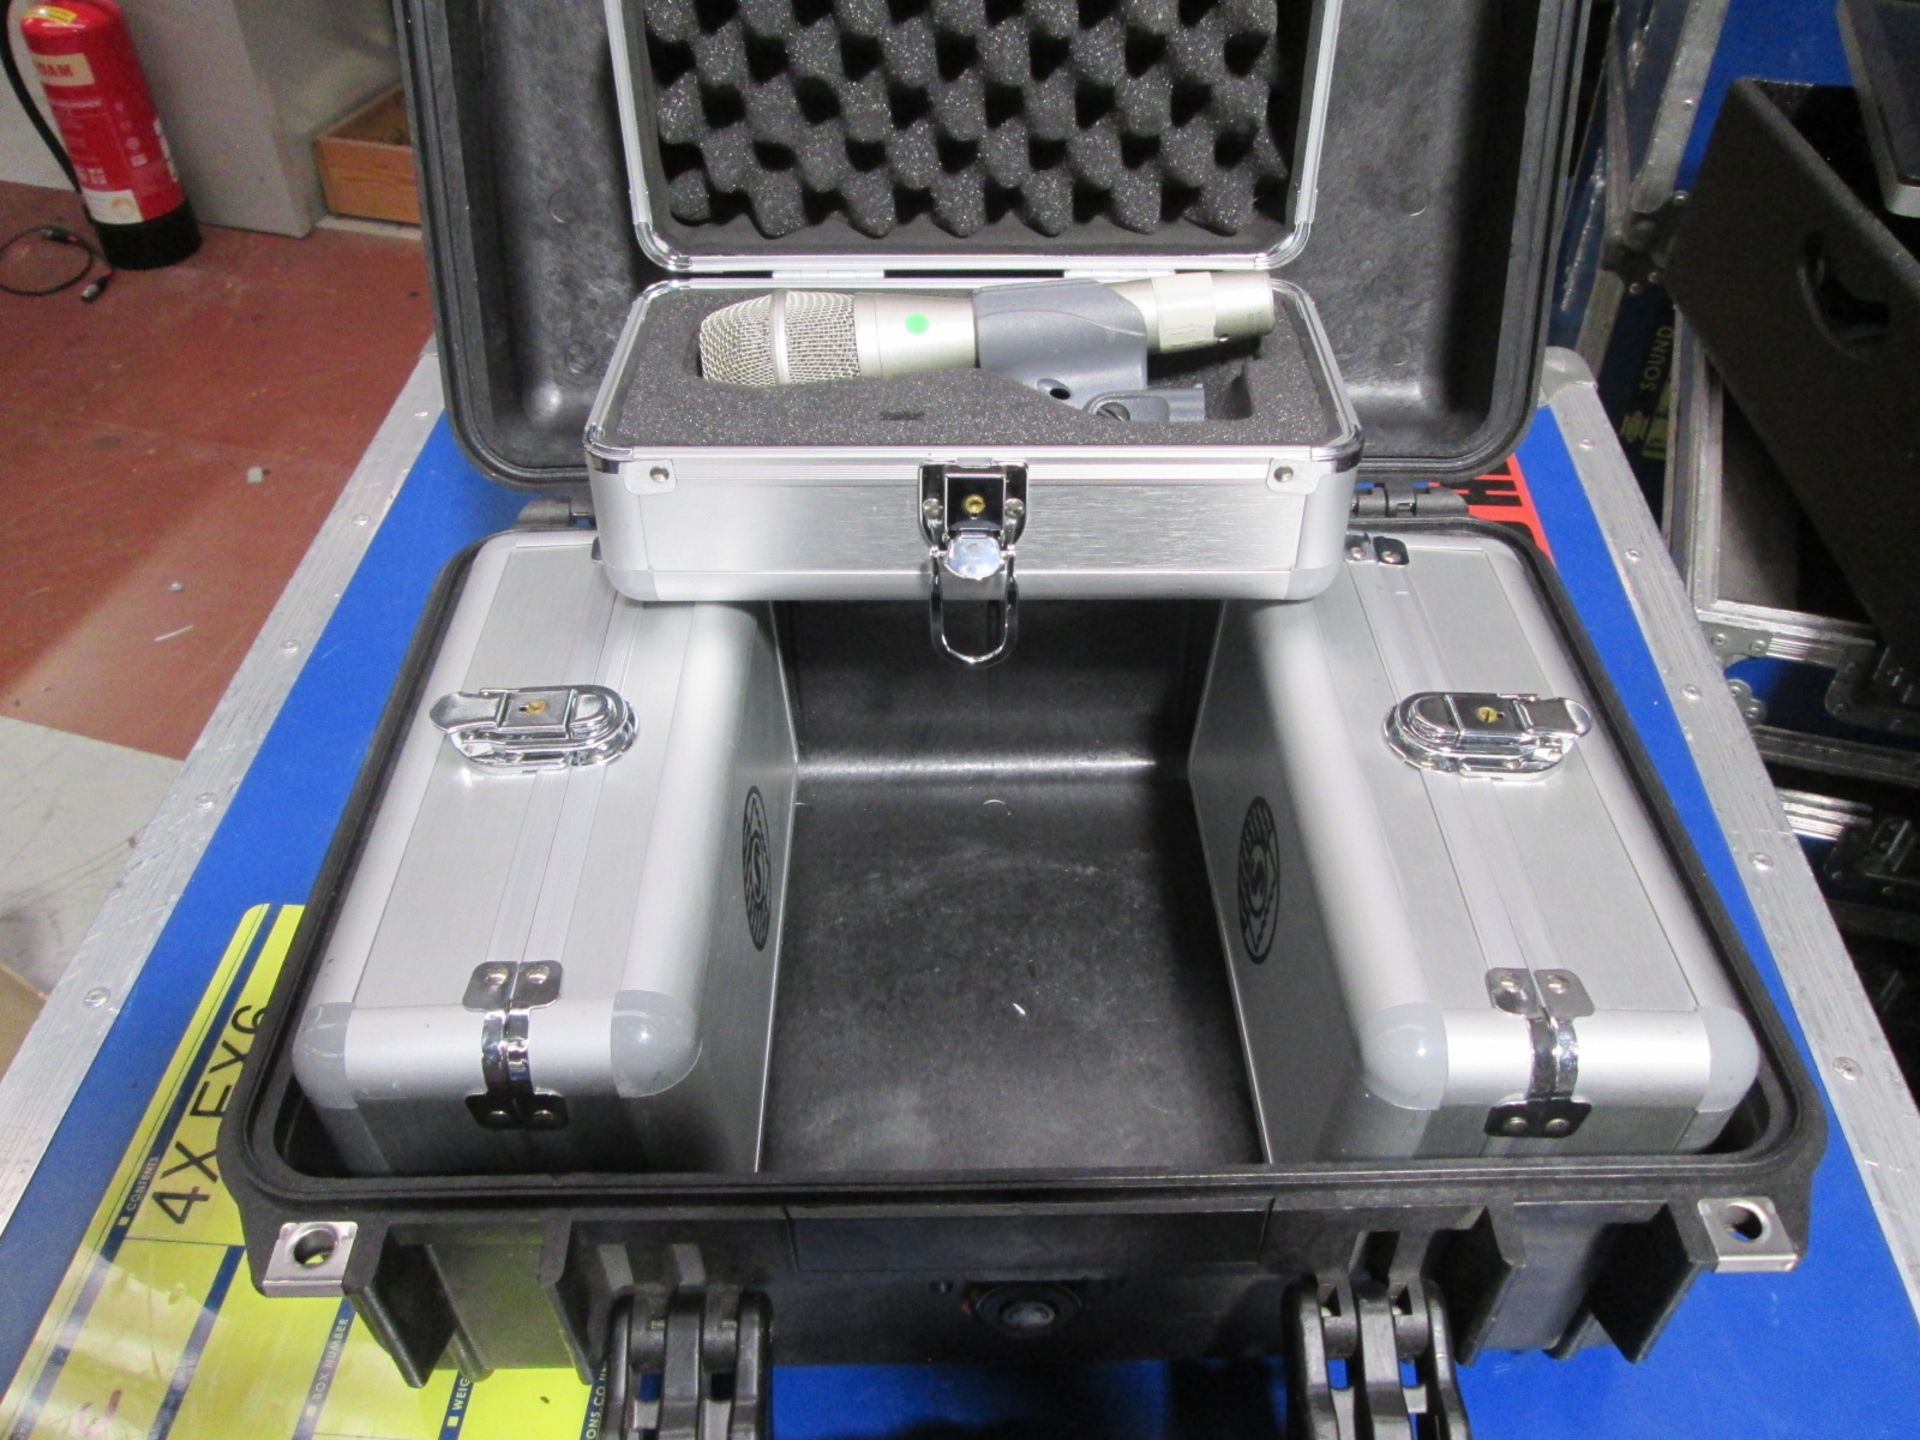 Shure KSM9 Dynamic Microphones (Qty 3) In flight and peli case